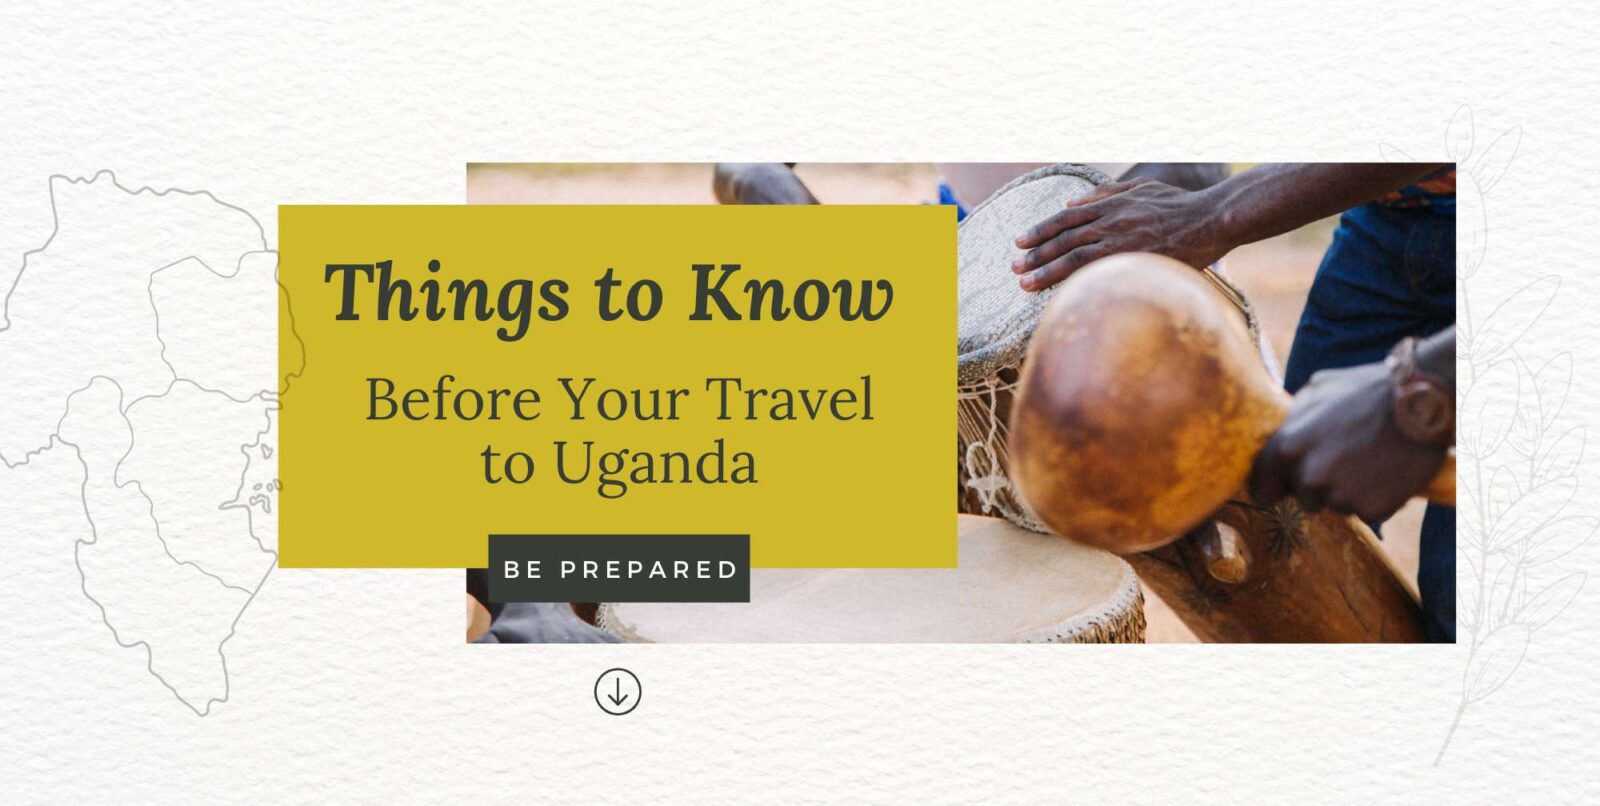 Things to Know When Traveling to Uganda